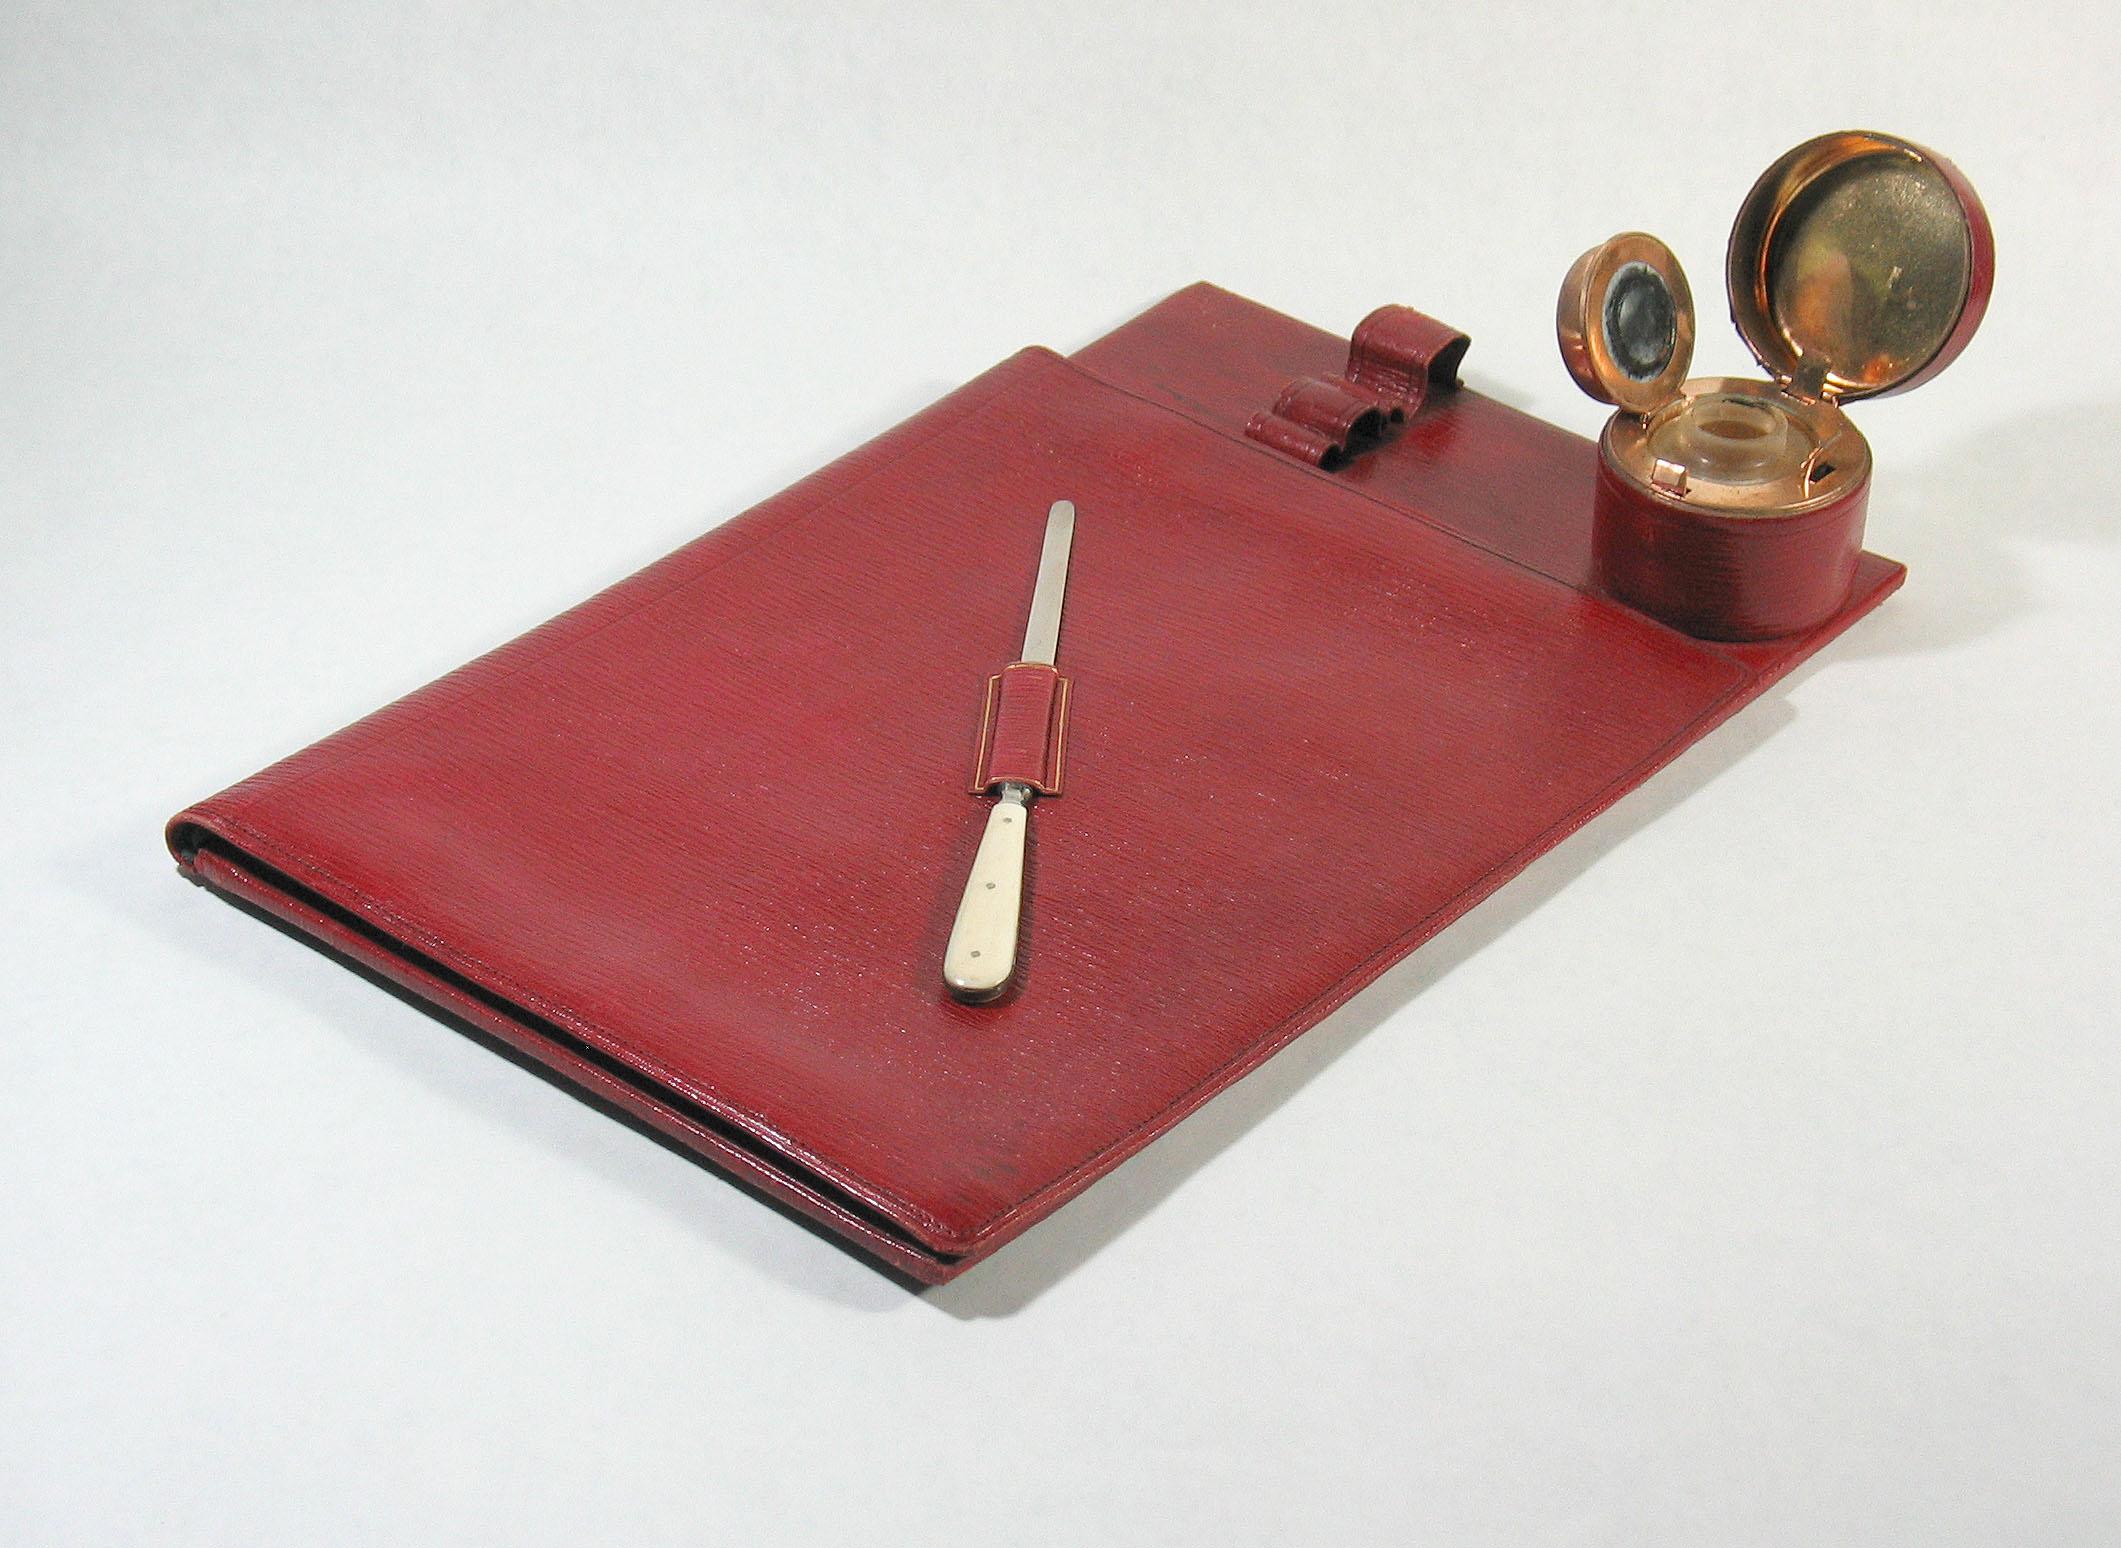 ANTIQUE VICTORIAN RED MOROCCO LEATHER
DESK OR TRAVELLING BLOTTER WITH INKWELL
Late 19th century.

Rare antique Victorian  desk stationery blotter folder with paper knife and unusual feature, built-in gilt brass and glass inkwell.
Made in Vienna and